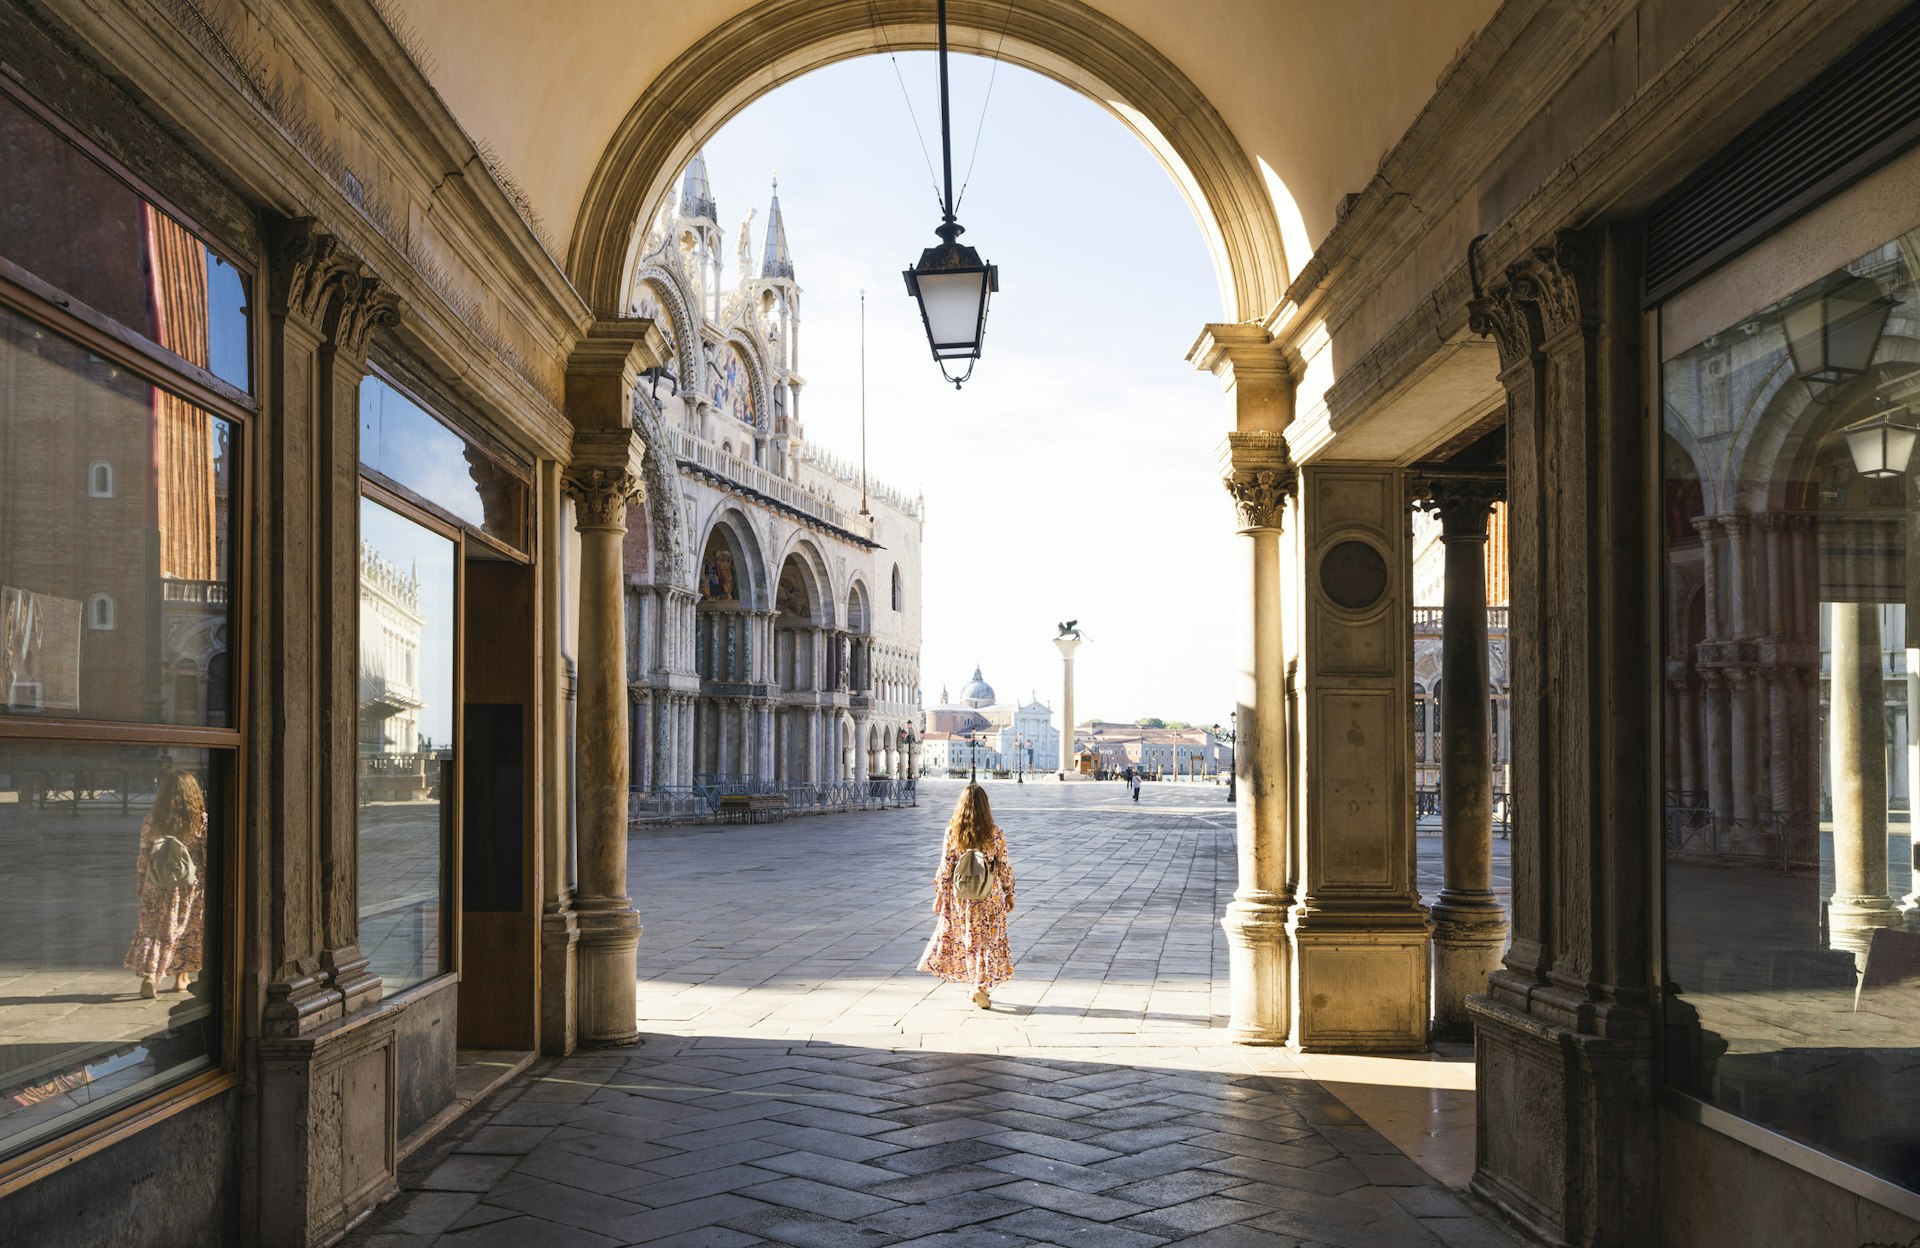 A woman walks through the arcade leading to St Mark's Square, with St Mark's cathedral in the background. Venice, Veneto region, Italy.